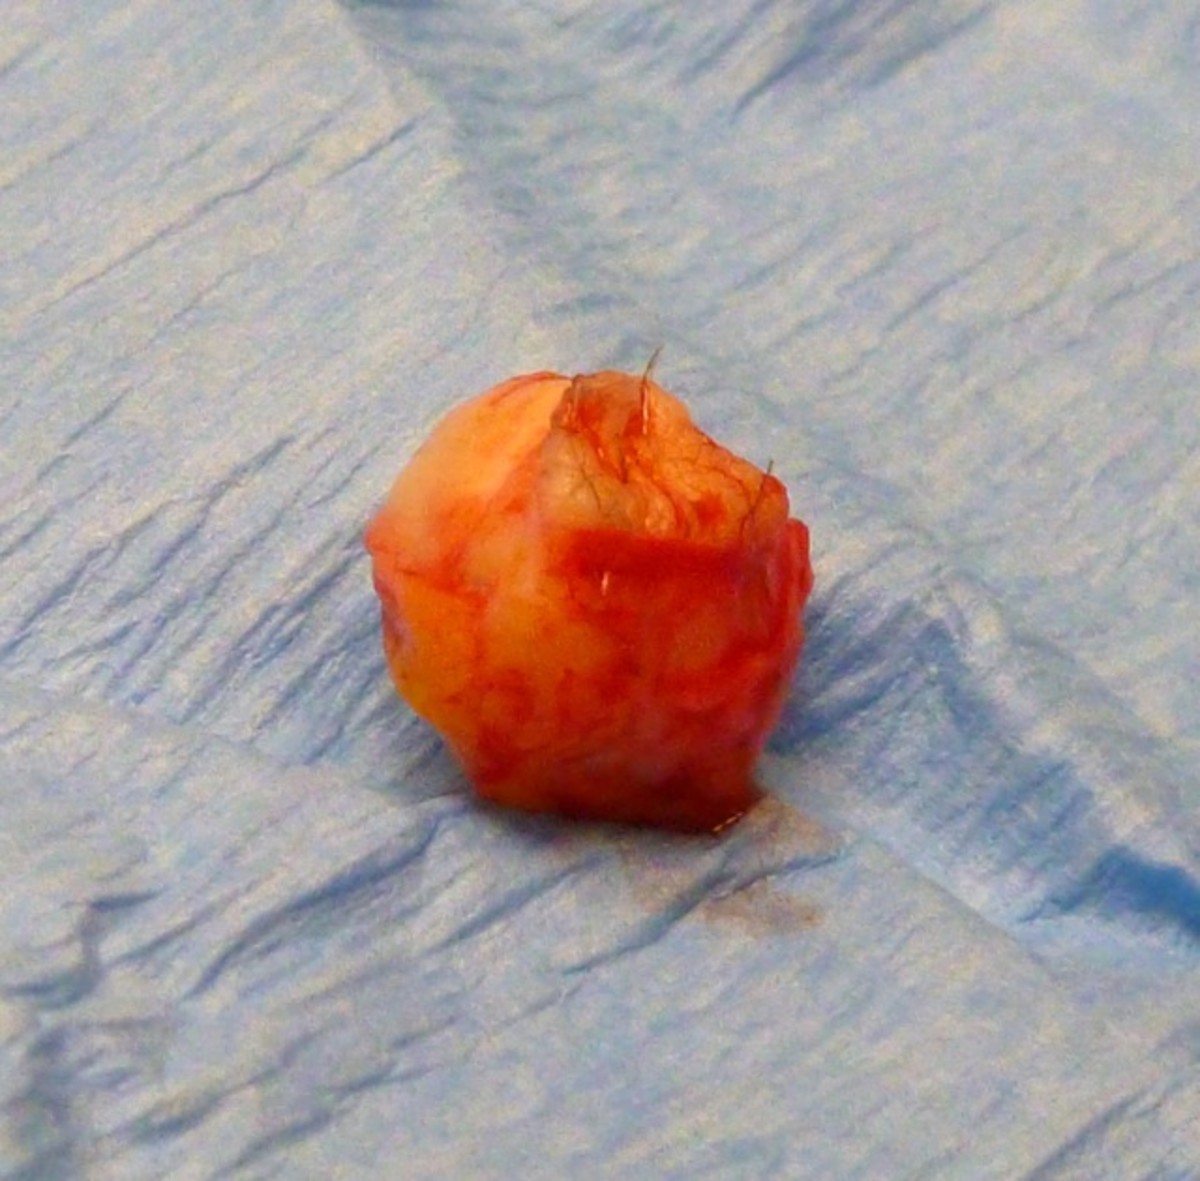 This Is What My Cyst Looked Like